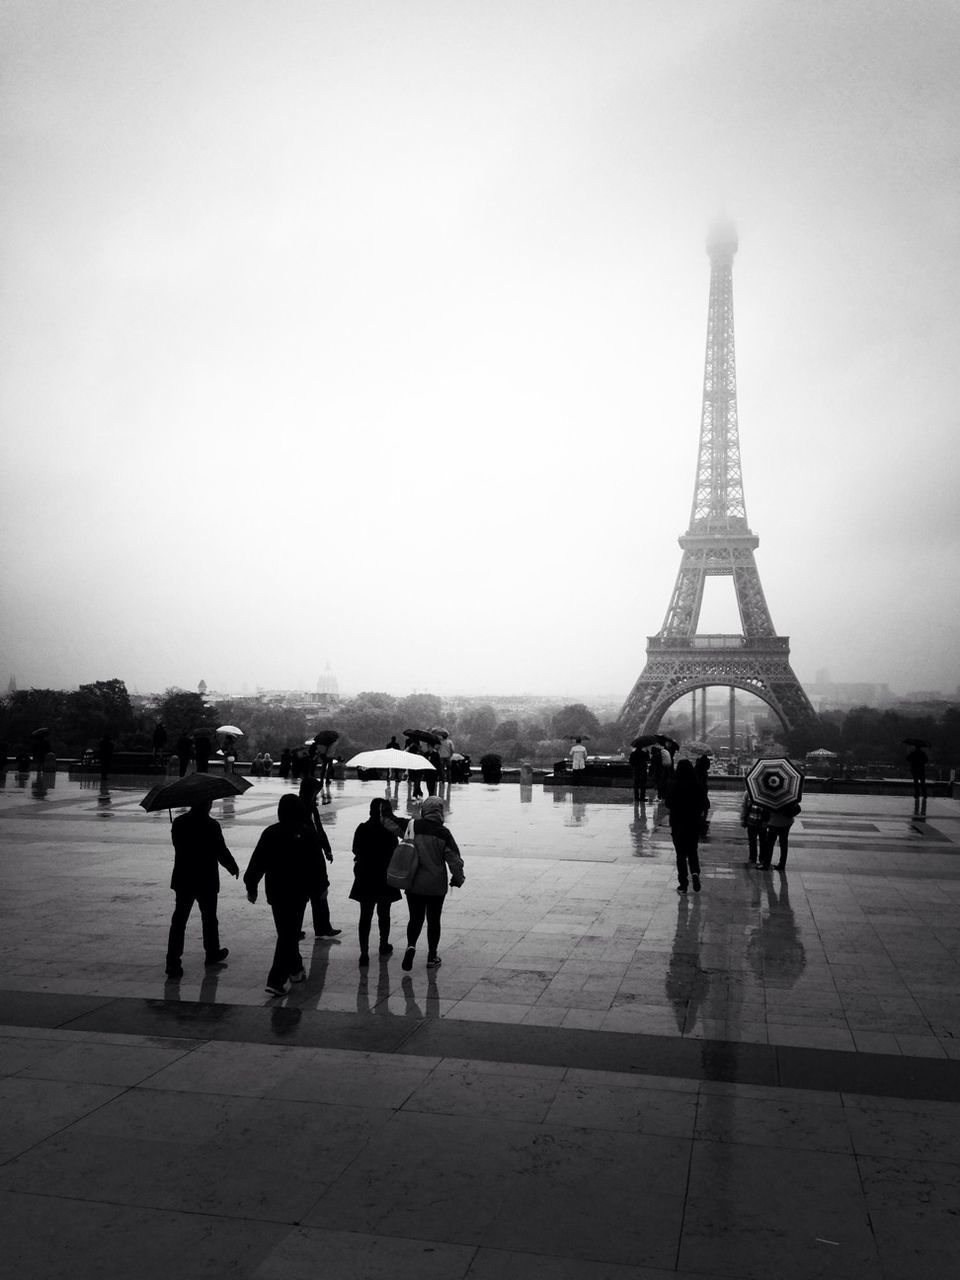 People by eiffel tower against sky during rainy season